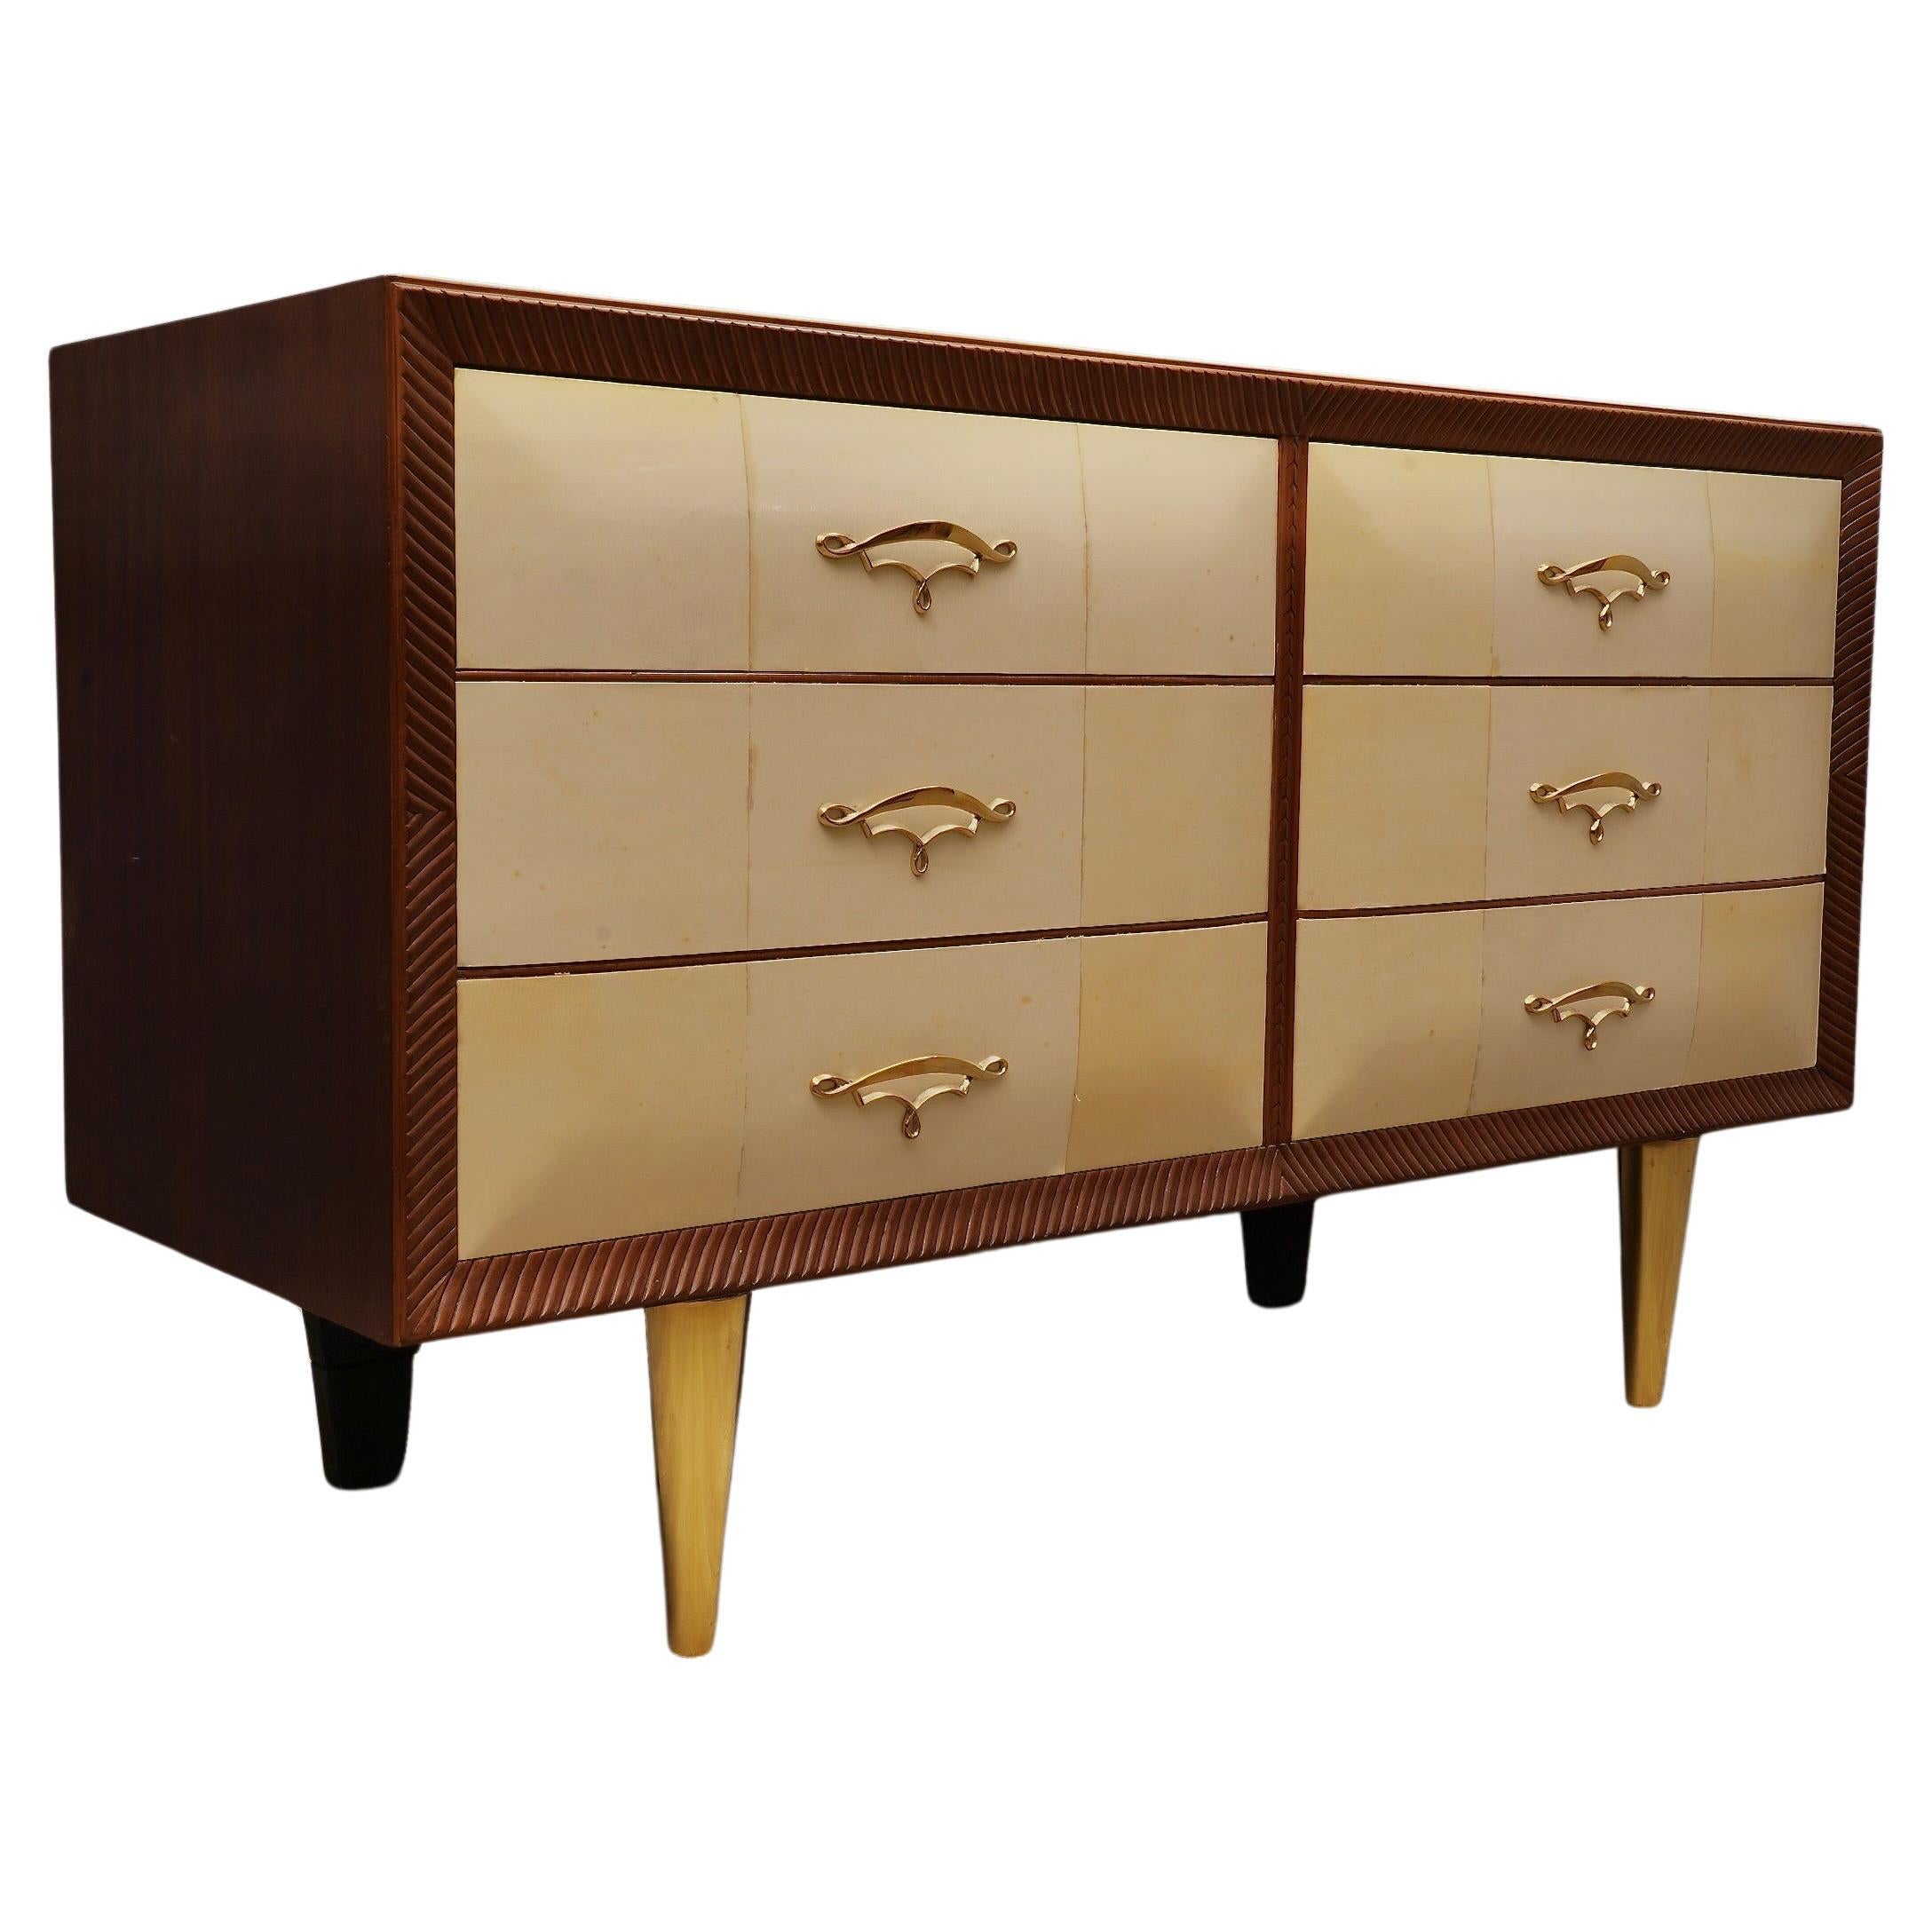 Art Deco Walnut Wood Goat Skin and Brass Italian Commode Chest of Drawers, 1940